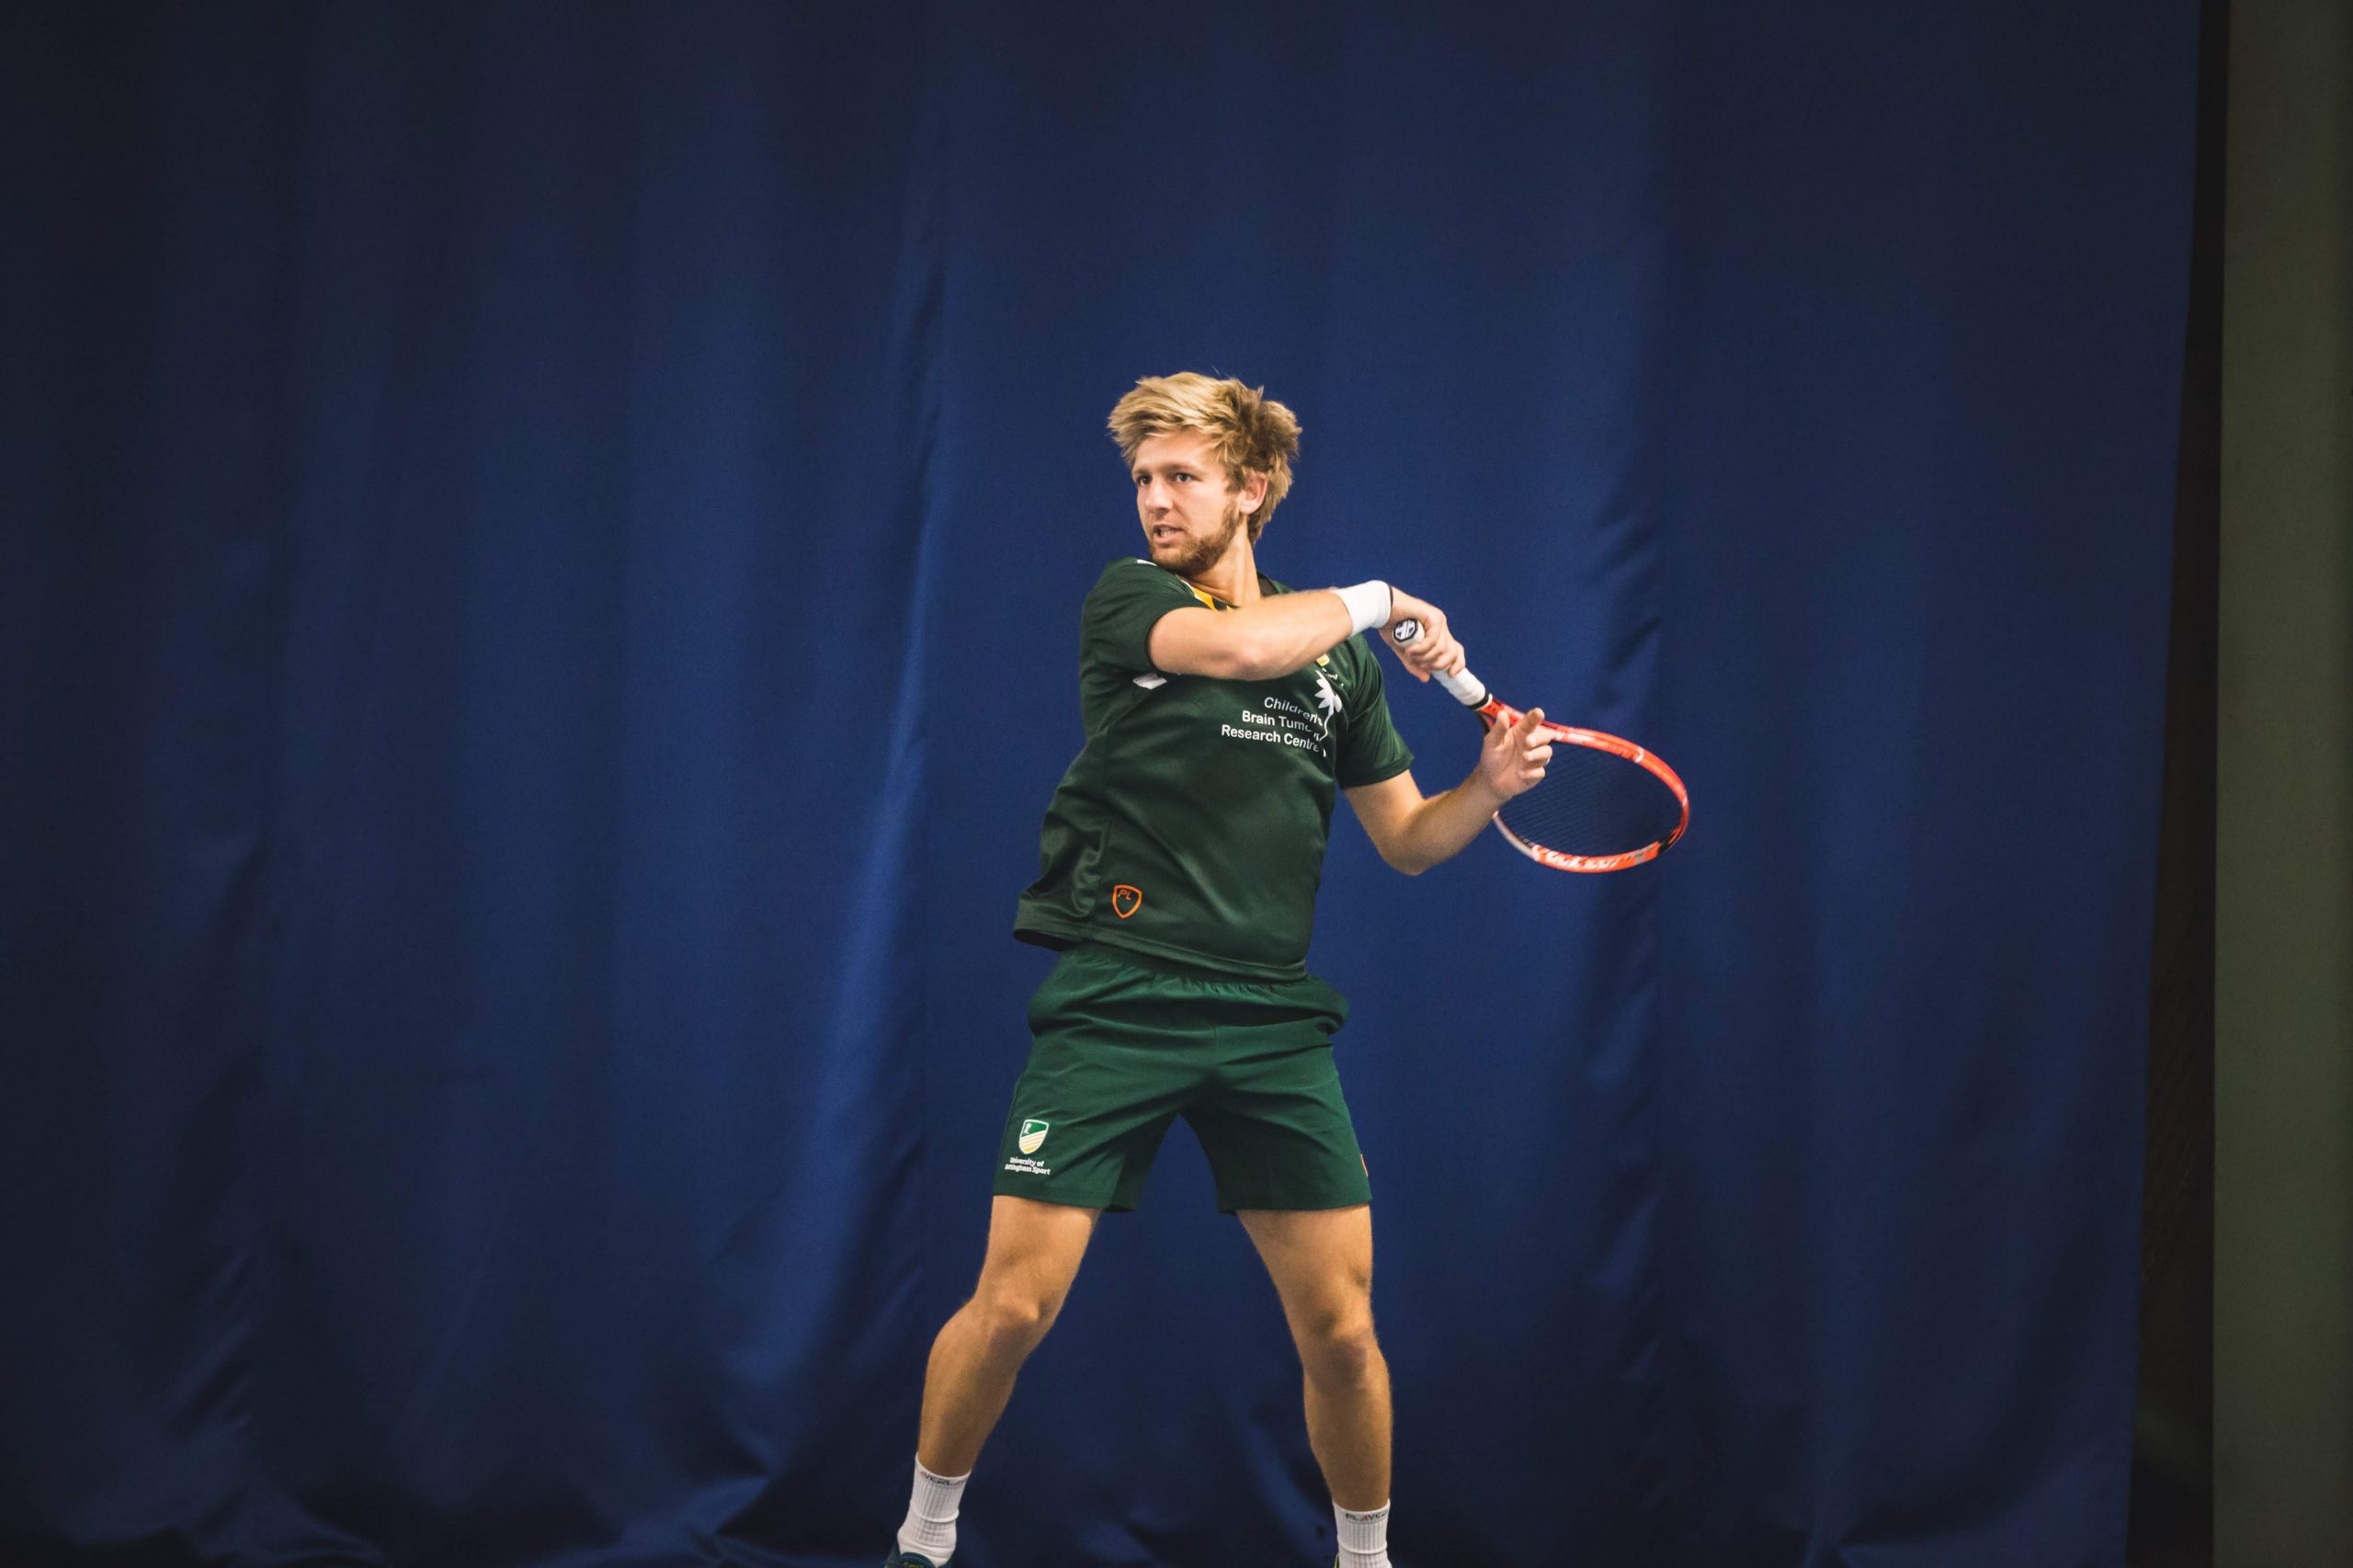 An image of Andrew playing tennis in his Son sports kit